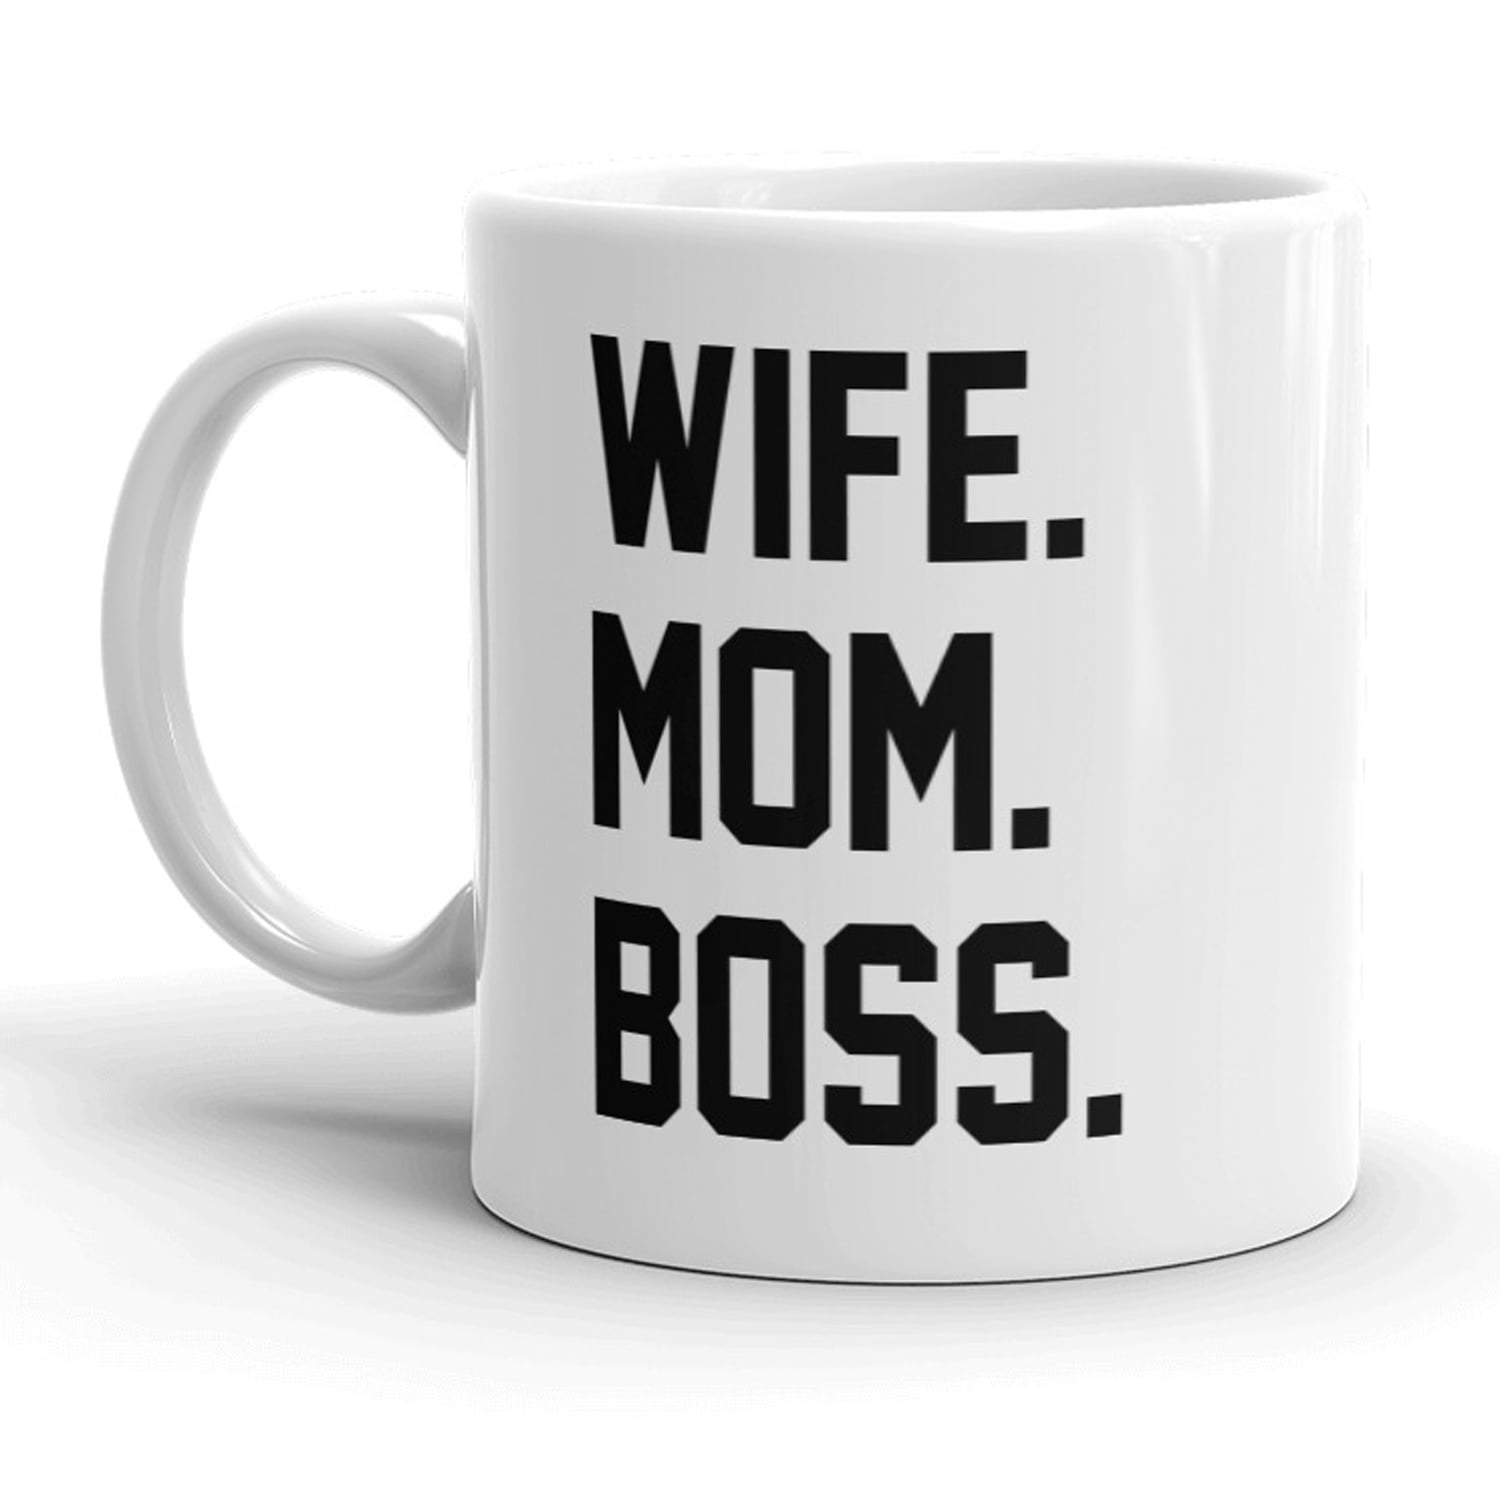 This Woman Wife Mom and Boss Funny Mothers Day Gift Cute Sweatshirt